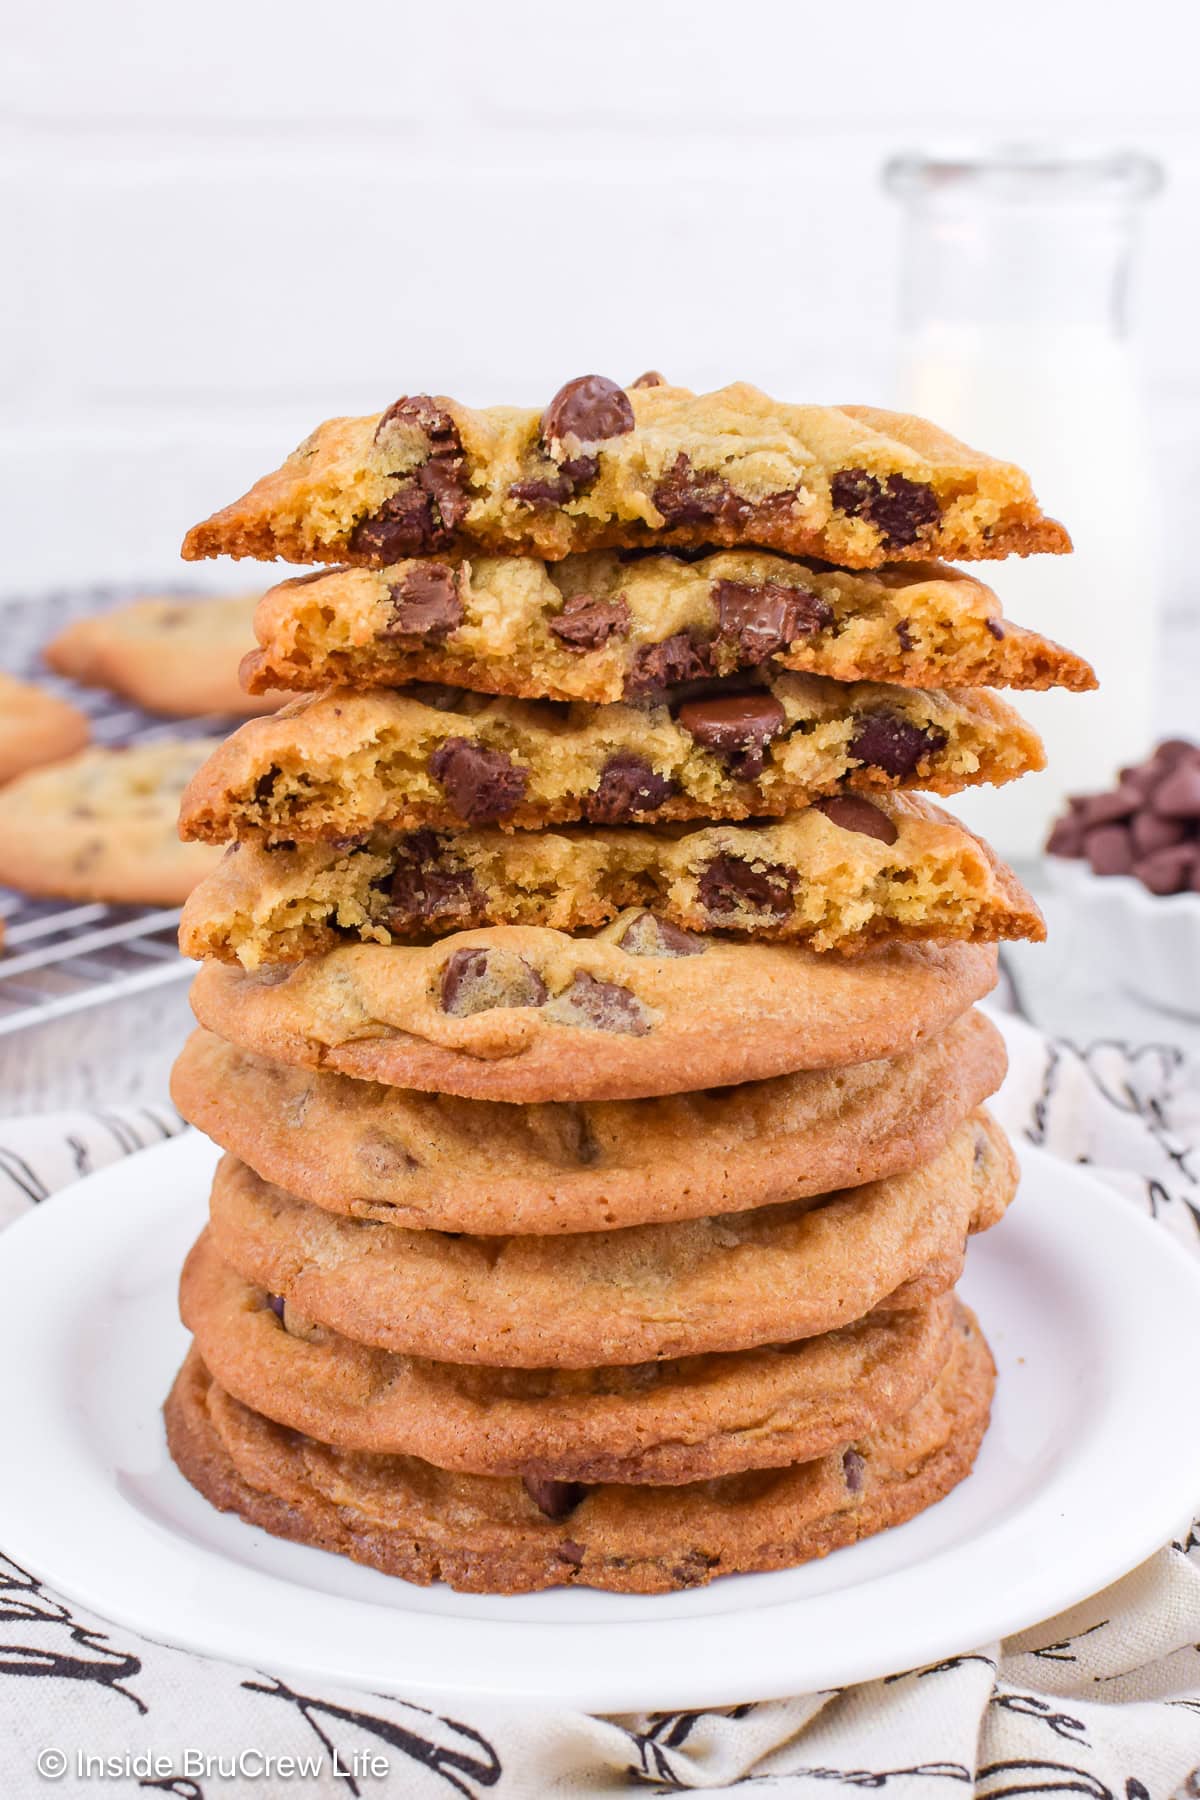 A large stack of crispy chocolate chip cookies on a white plate.